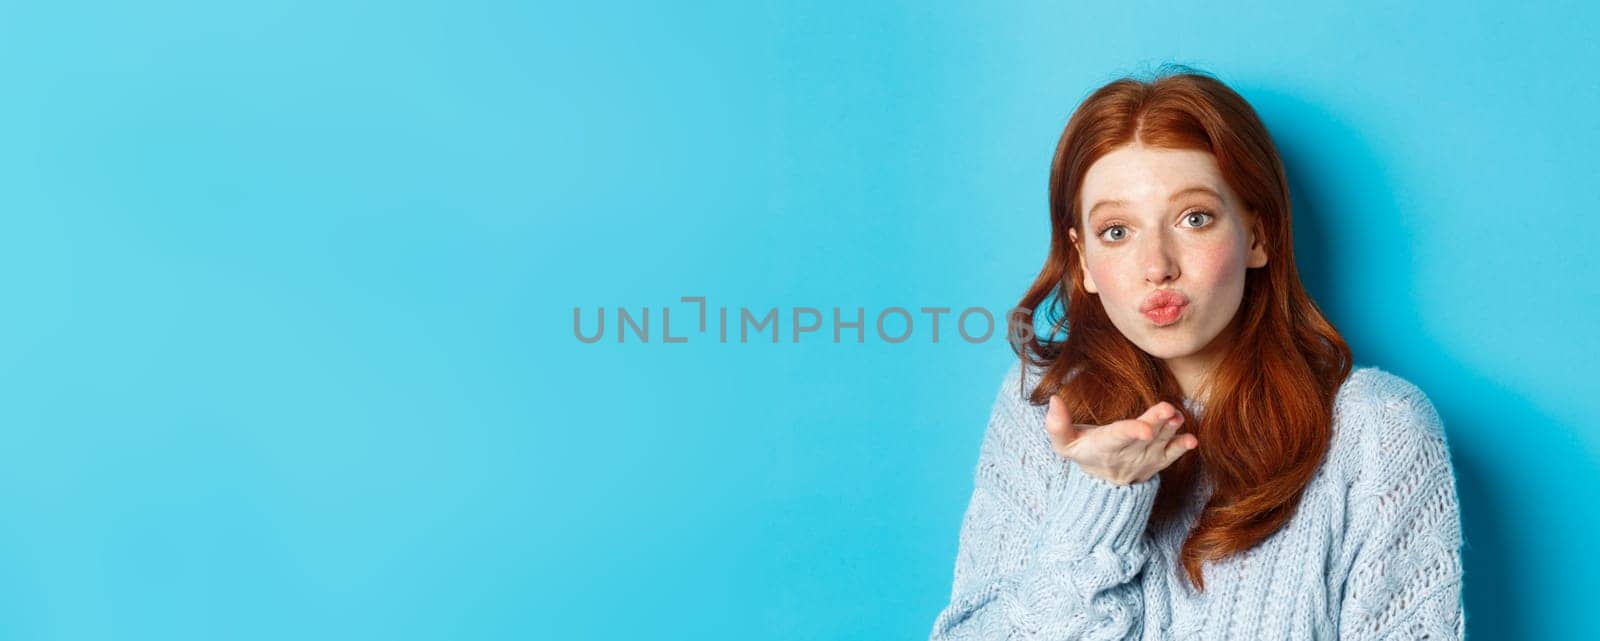 Silly redhead woman in sweater, blowing air kiss at camera with puckered lips, standing against blue background.